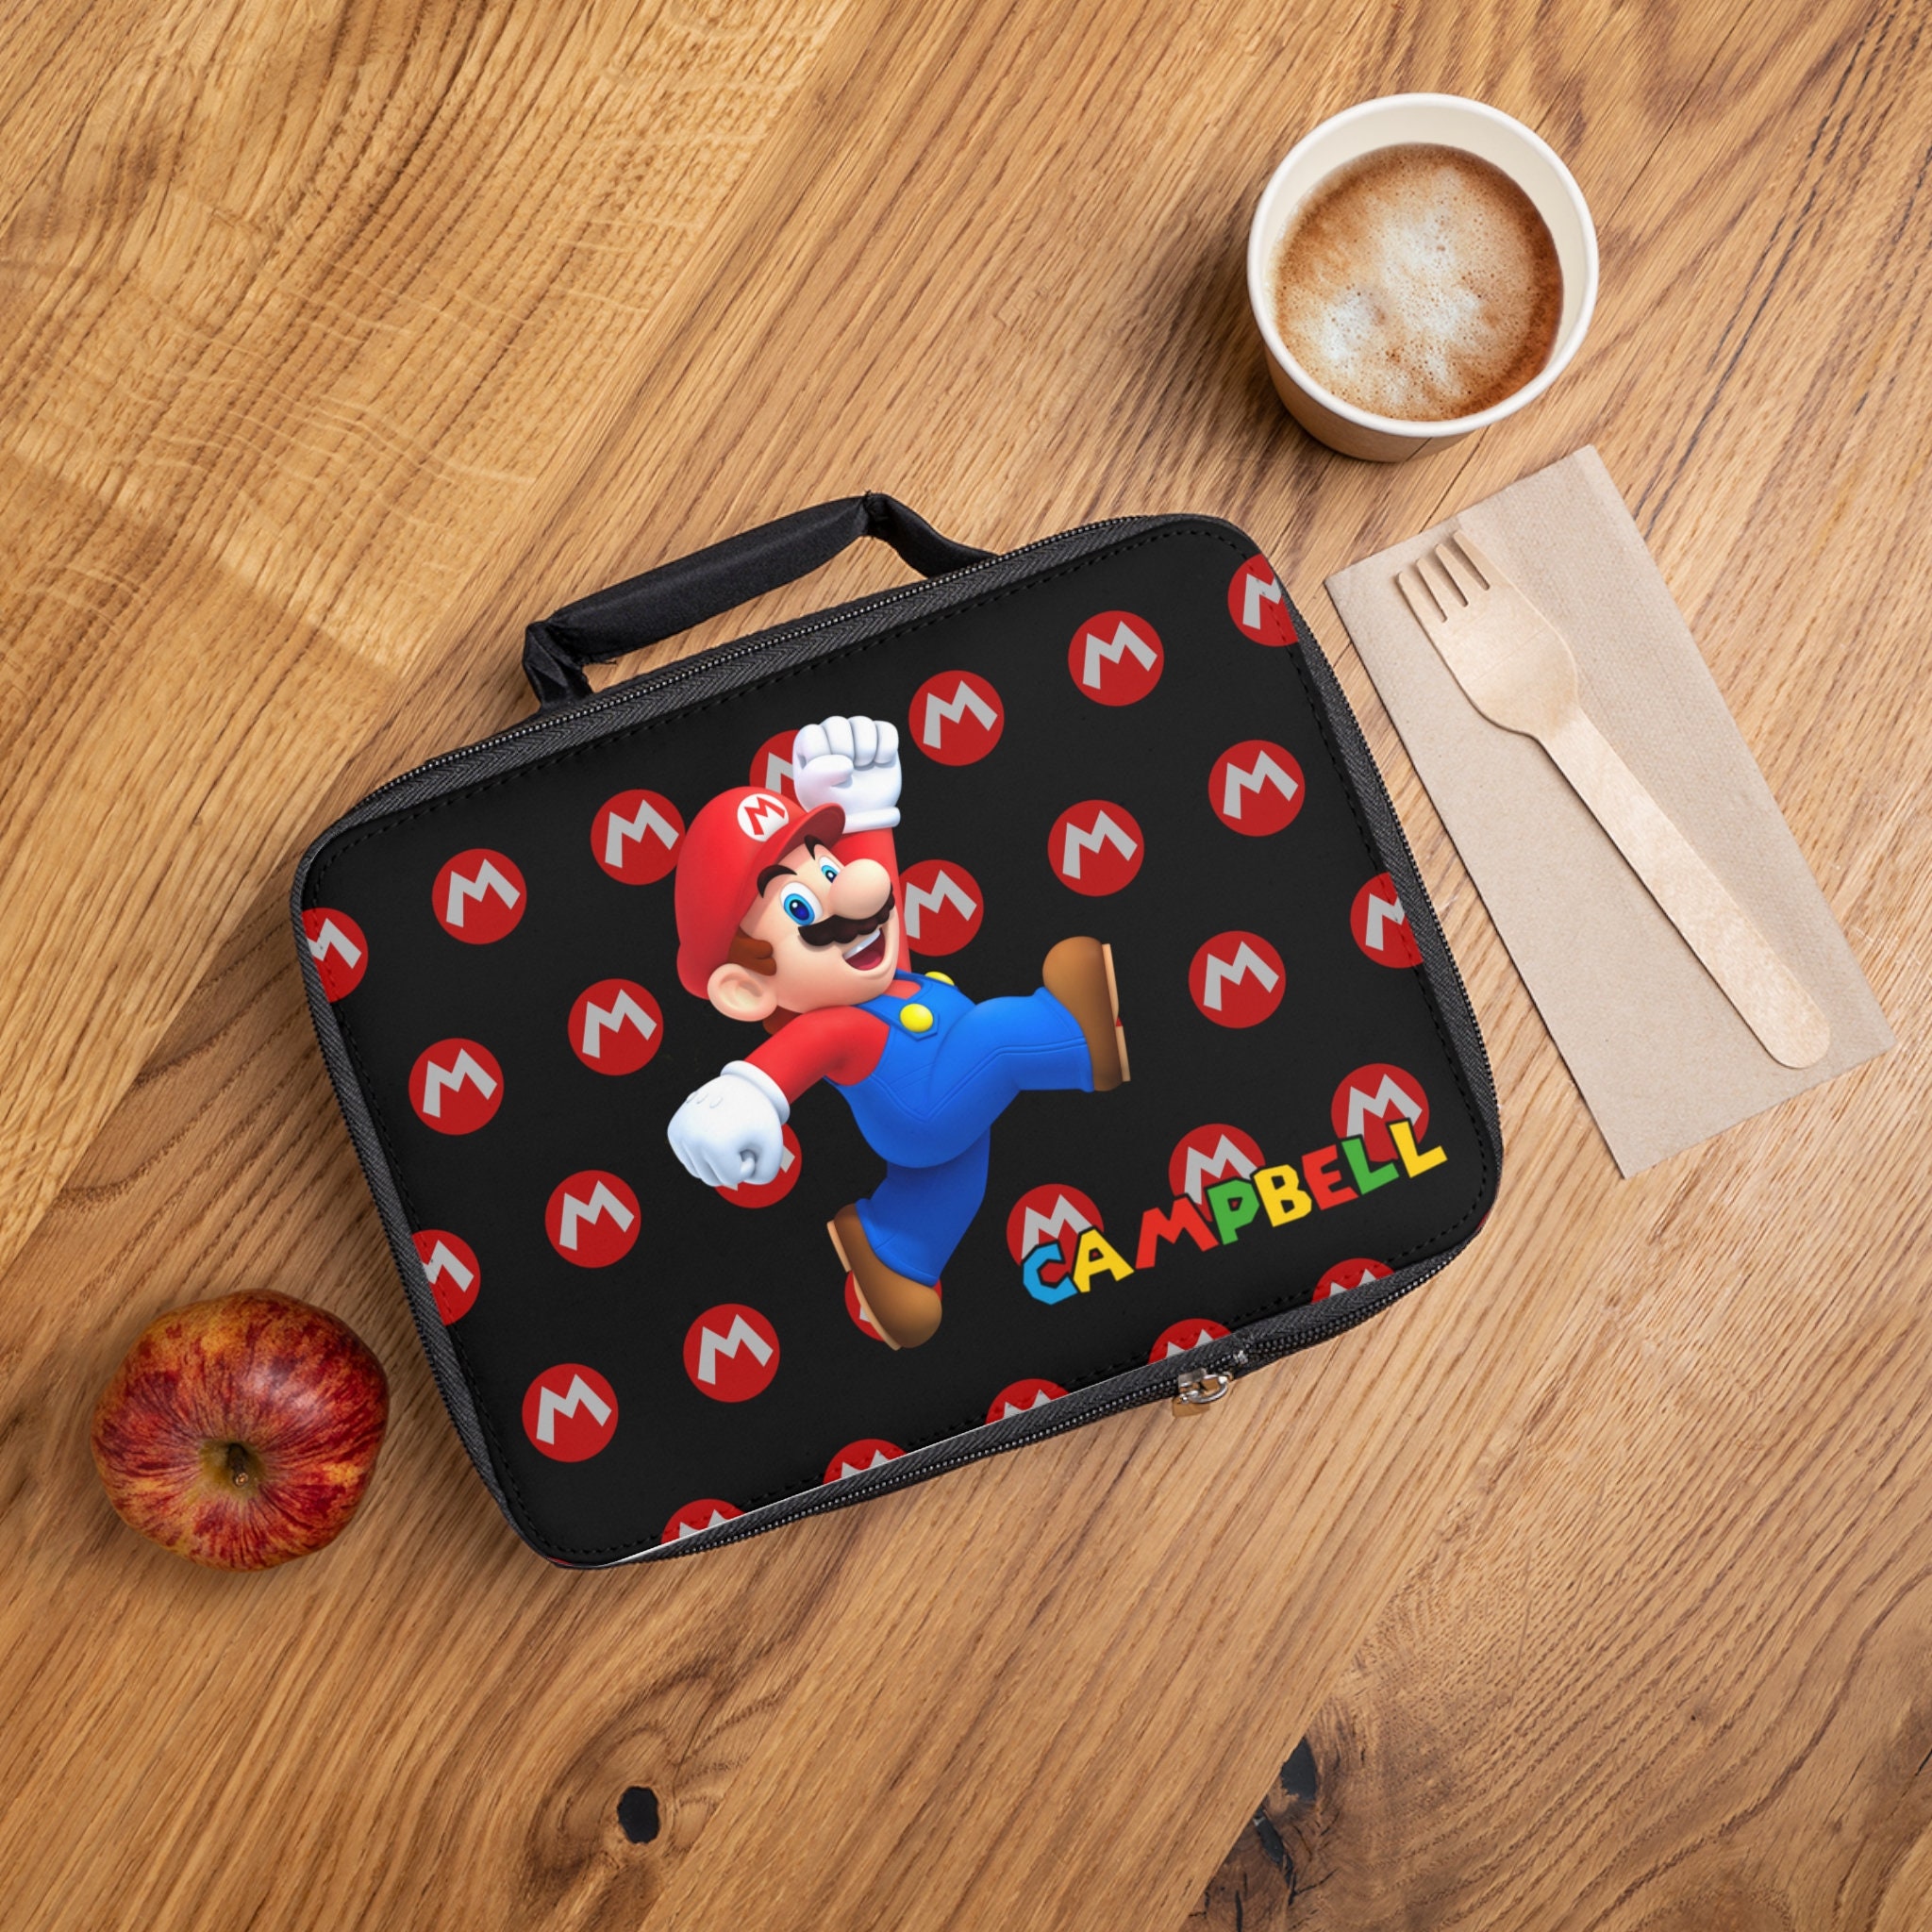 Personalized Nintendo Super Mario Lunch Bag Luigi Toad Bowser Insulated  Travel Bag 